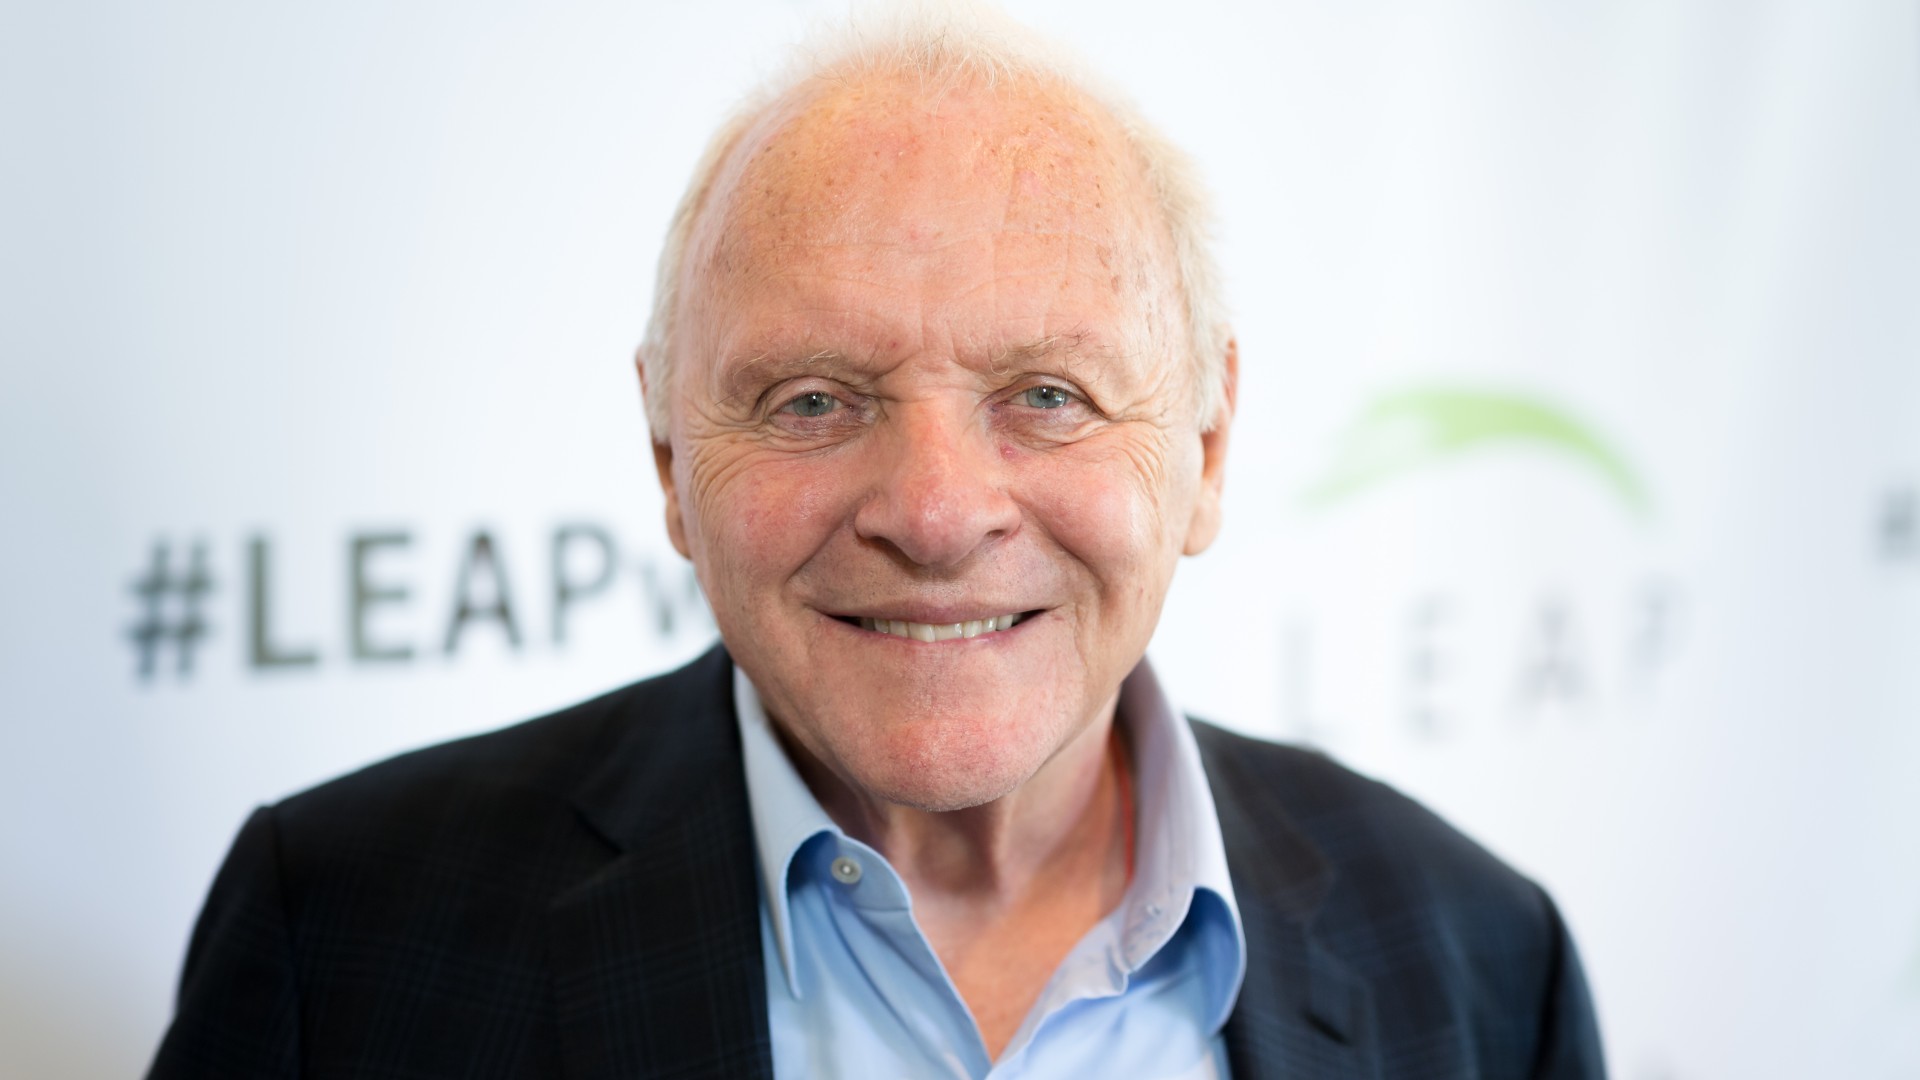 Casting News: Anthony Hopkins to Play Roman Emperor in 'Those About to Die'